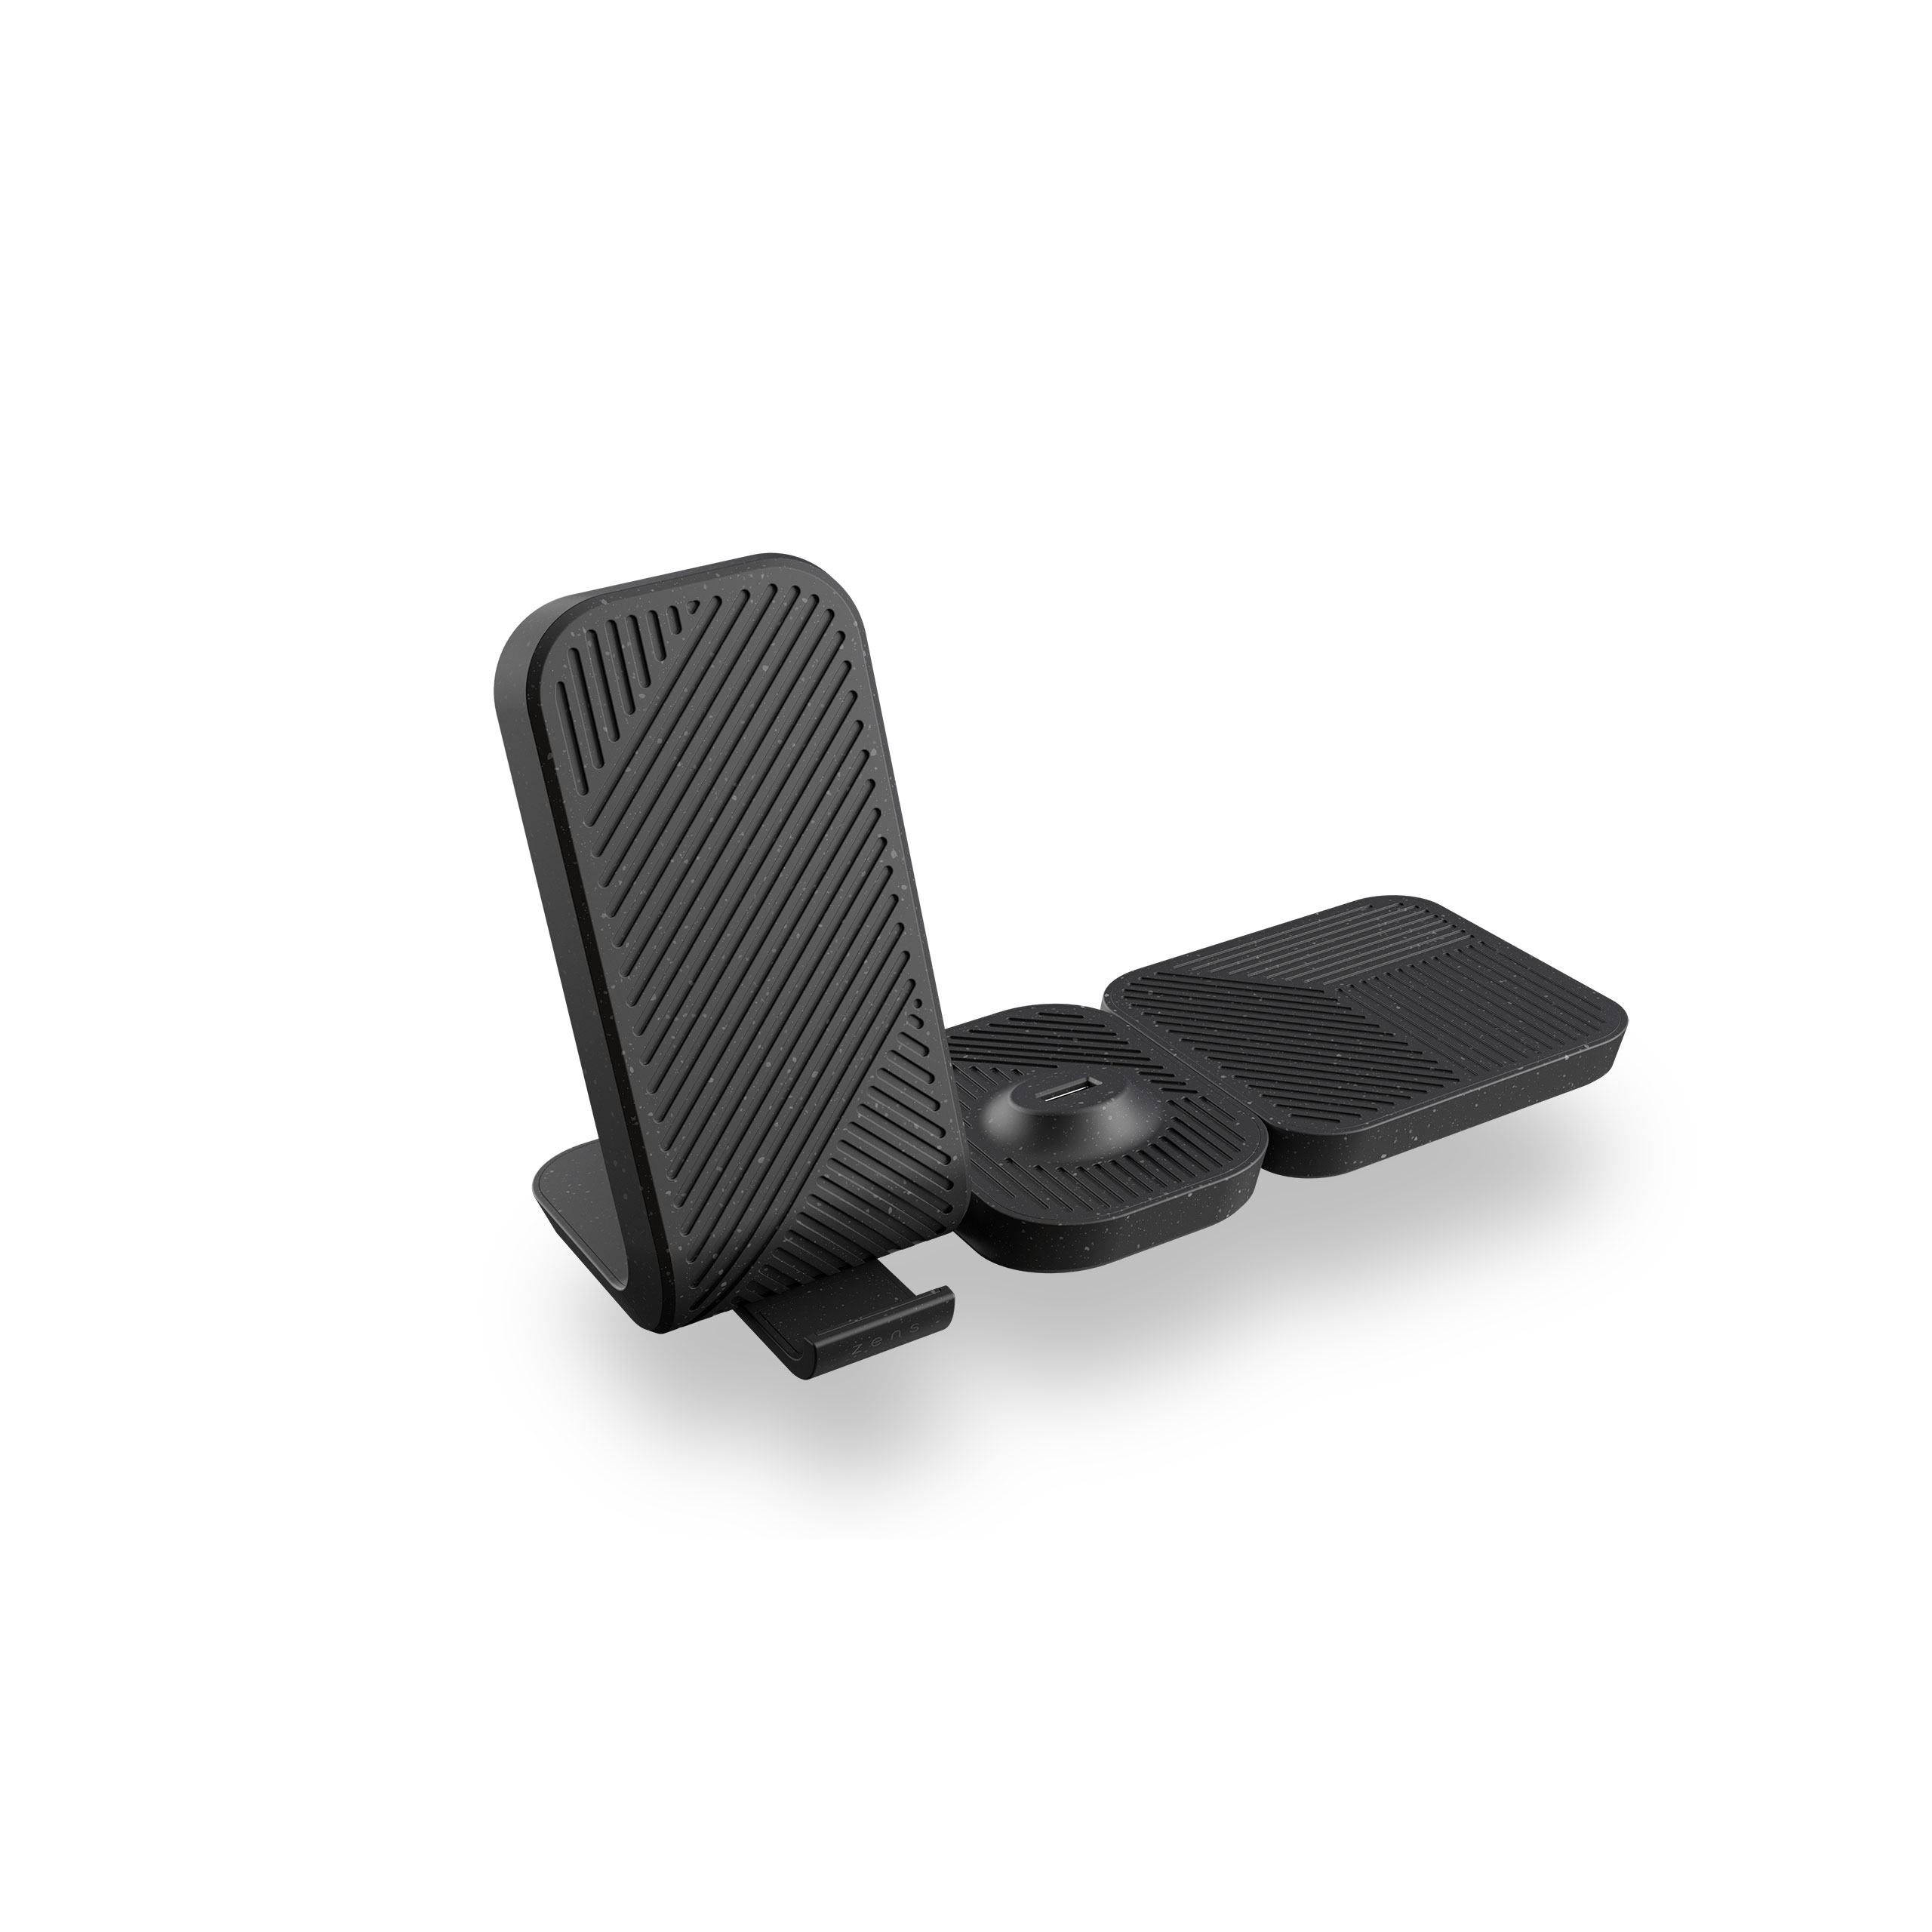 ZEMSC2P Zens Modular Stand Wireless Charger With Extensions